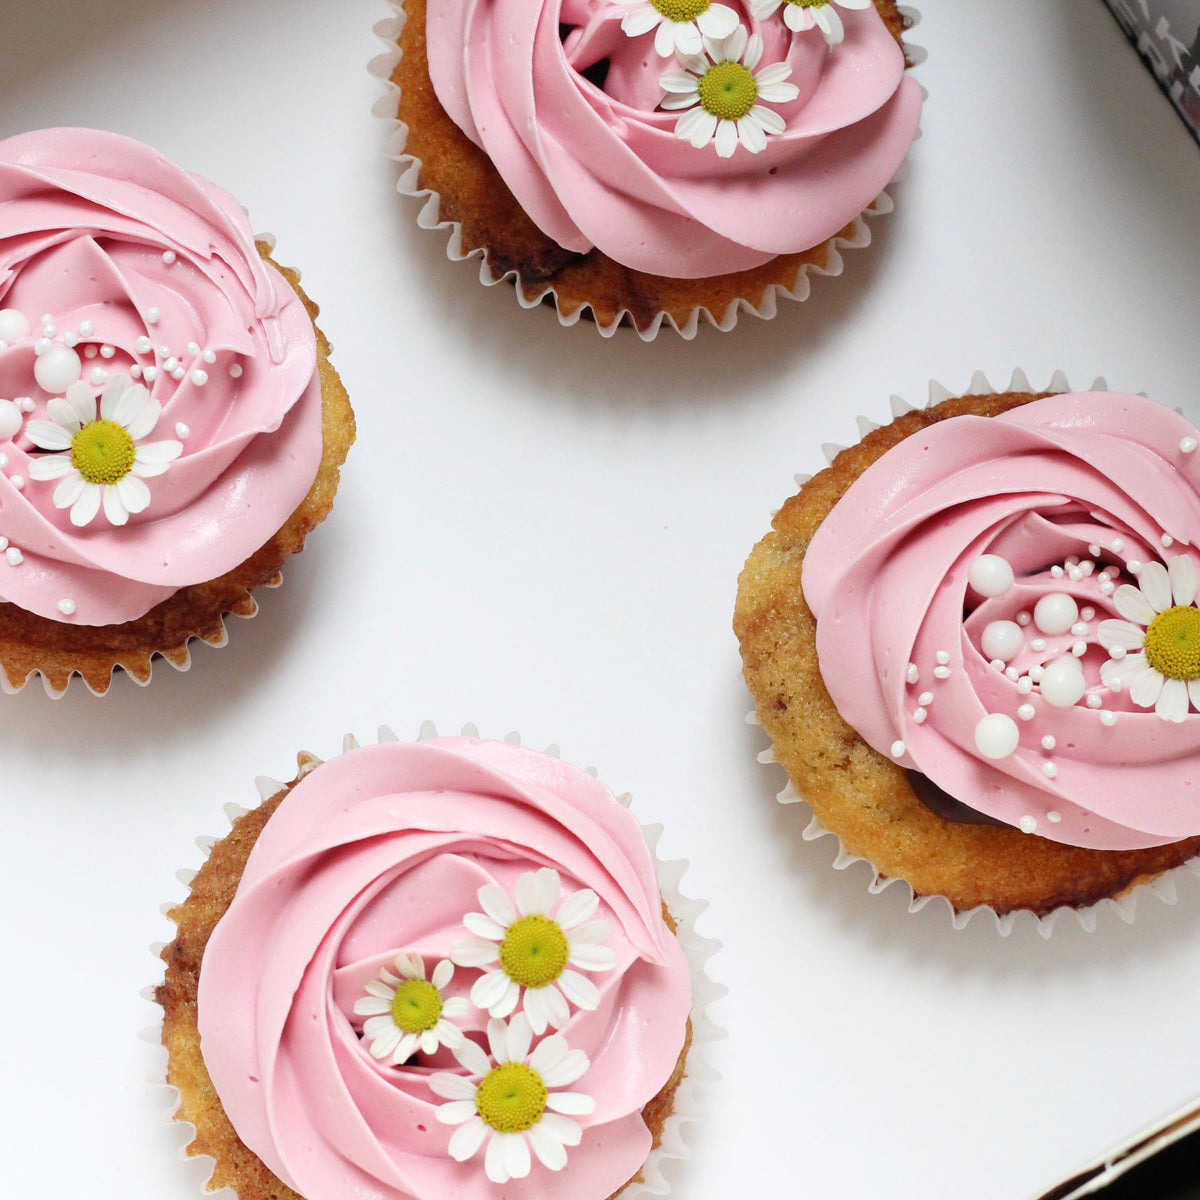 Our signature cupcakes with pink buttercream, adorned with daisies on top!